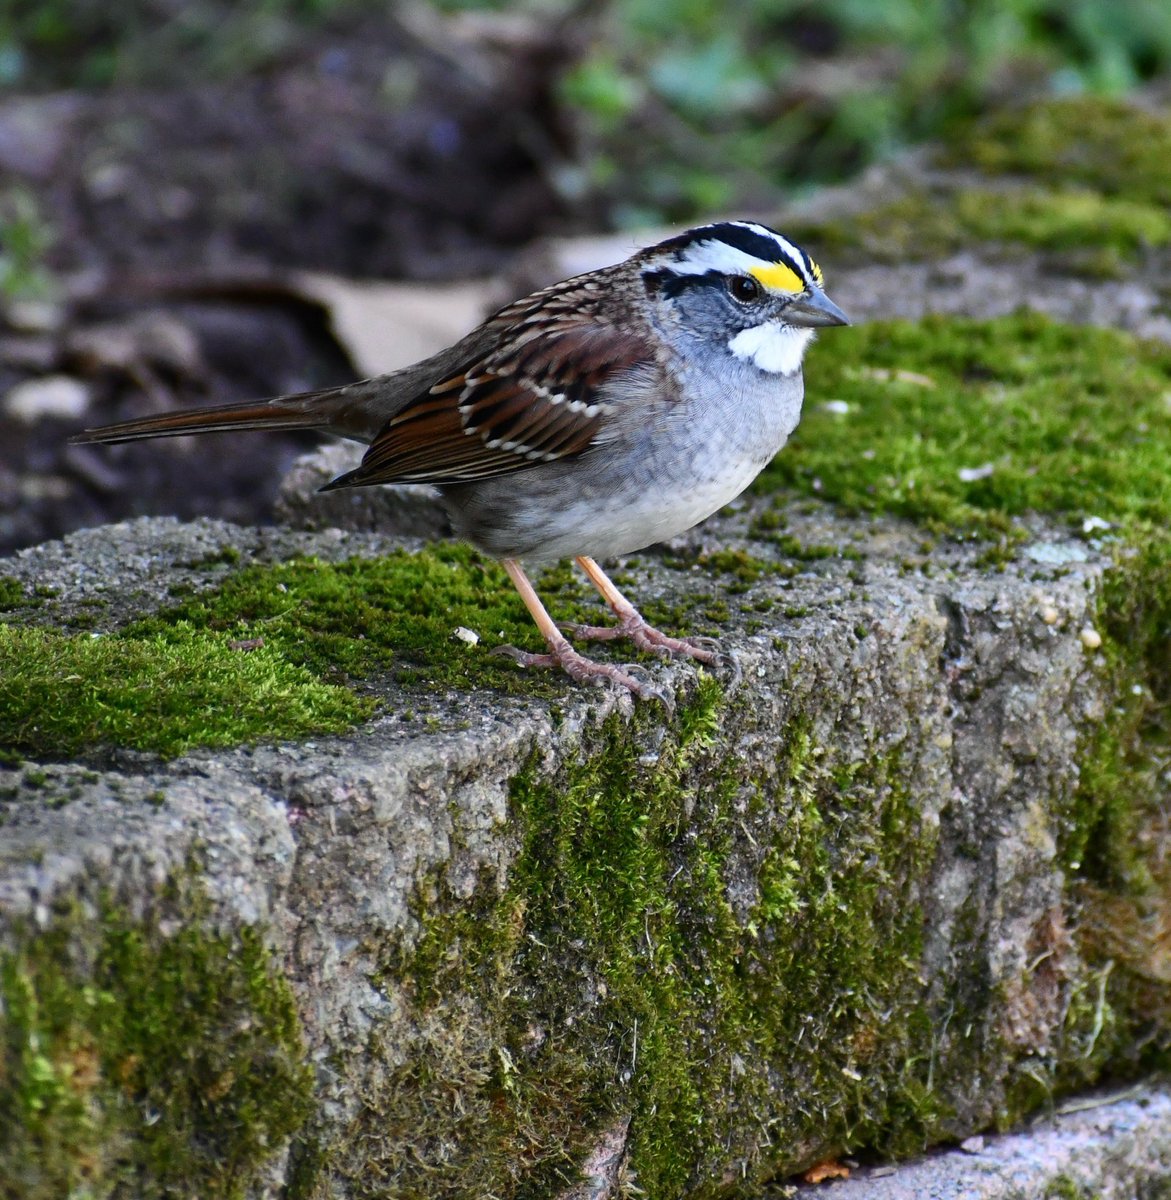 White-throated Sparrow💛
#birdphotography